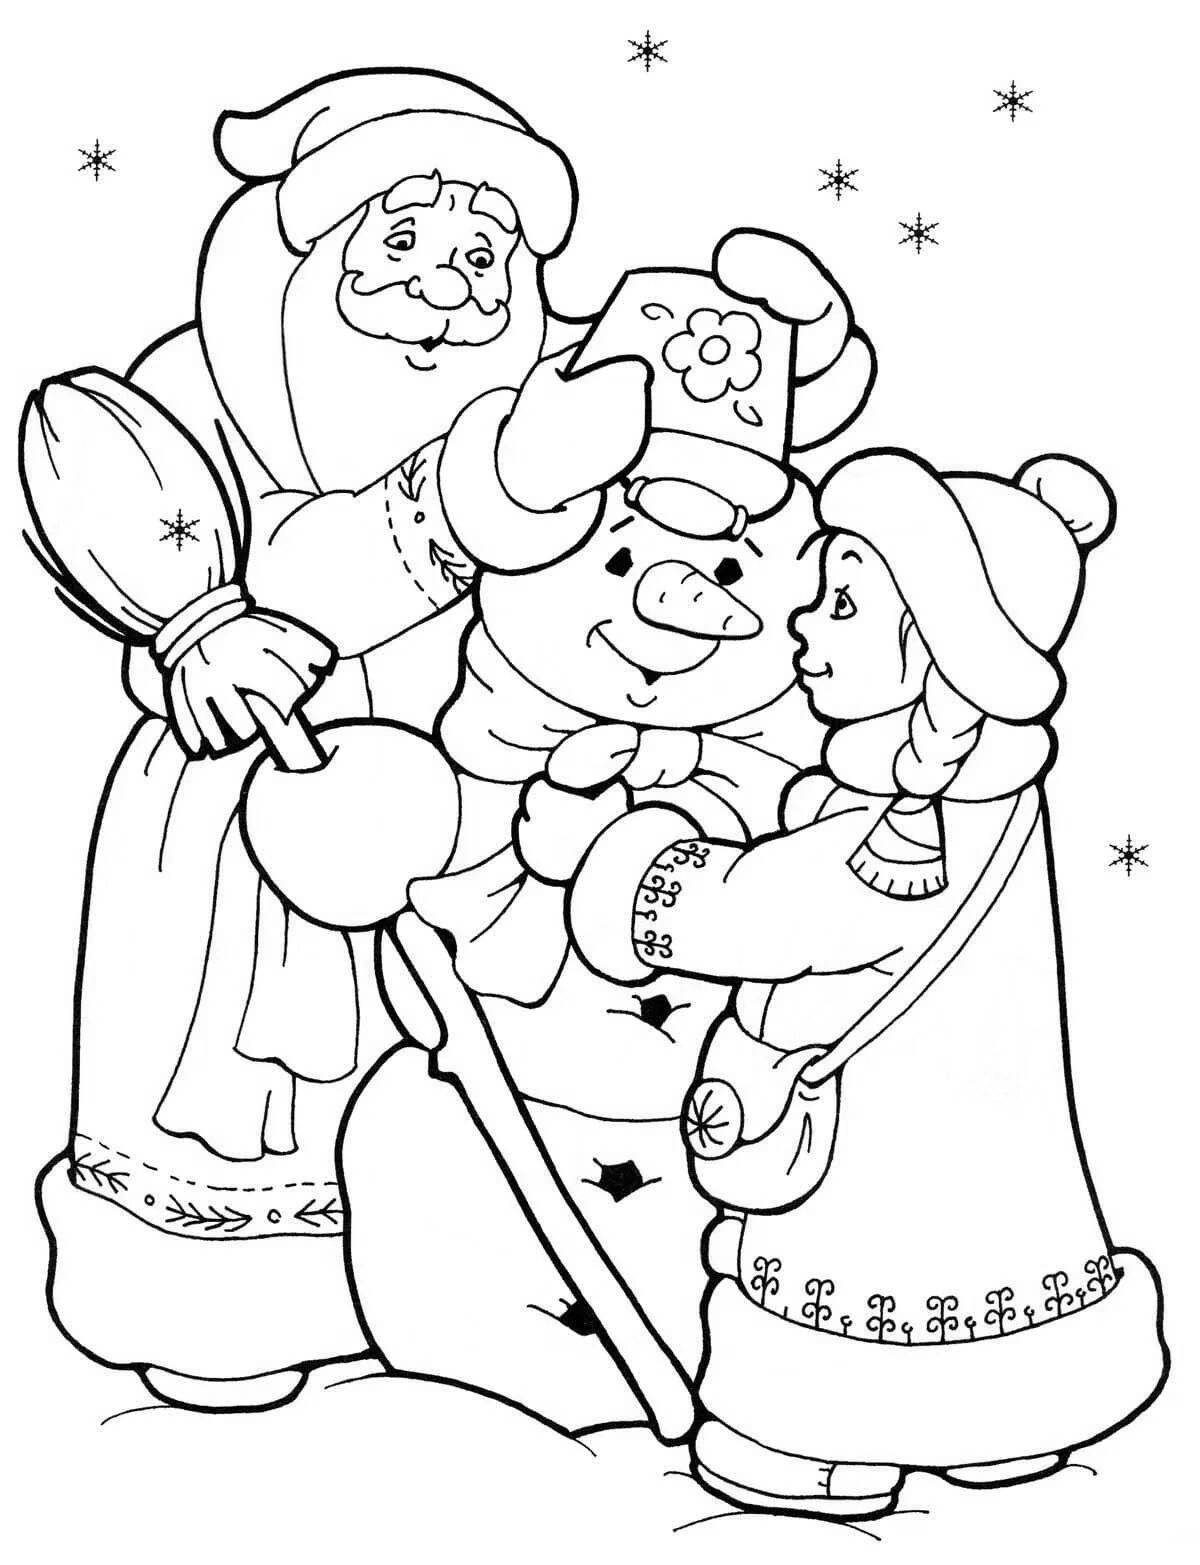 Gorgeous Christmas tree coloring book